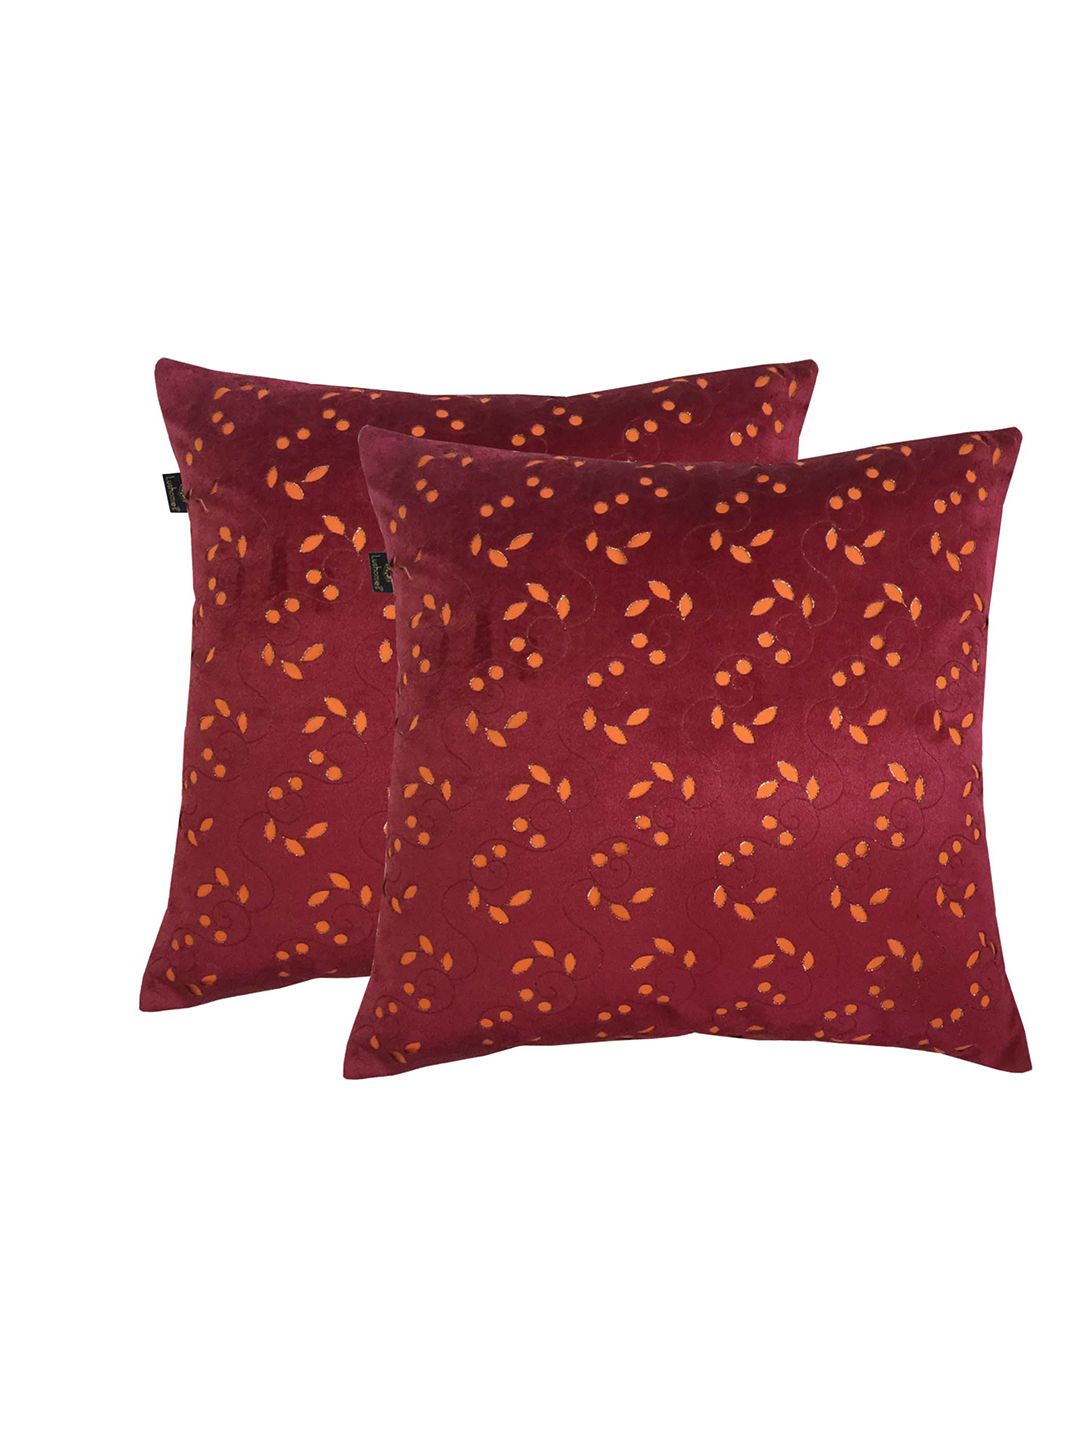 Lushomes Maroon & Orange Set of 2 Abstract Square Cushion Covers Price in India